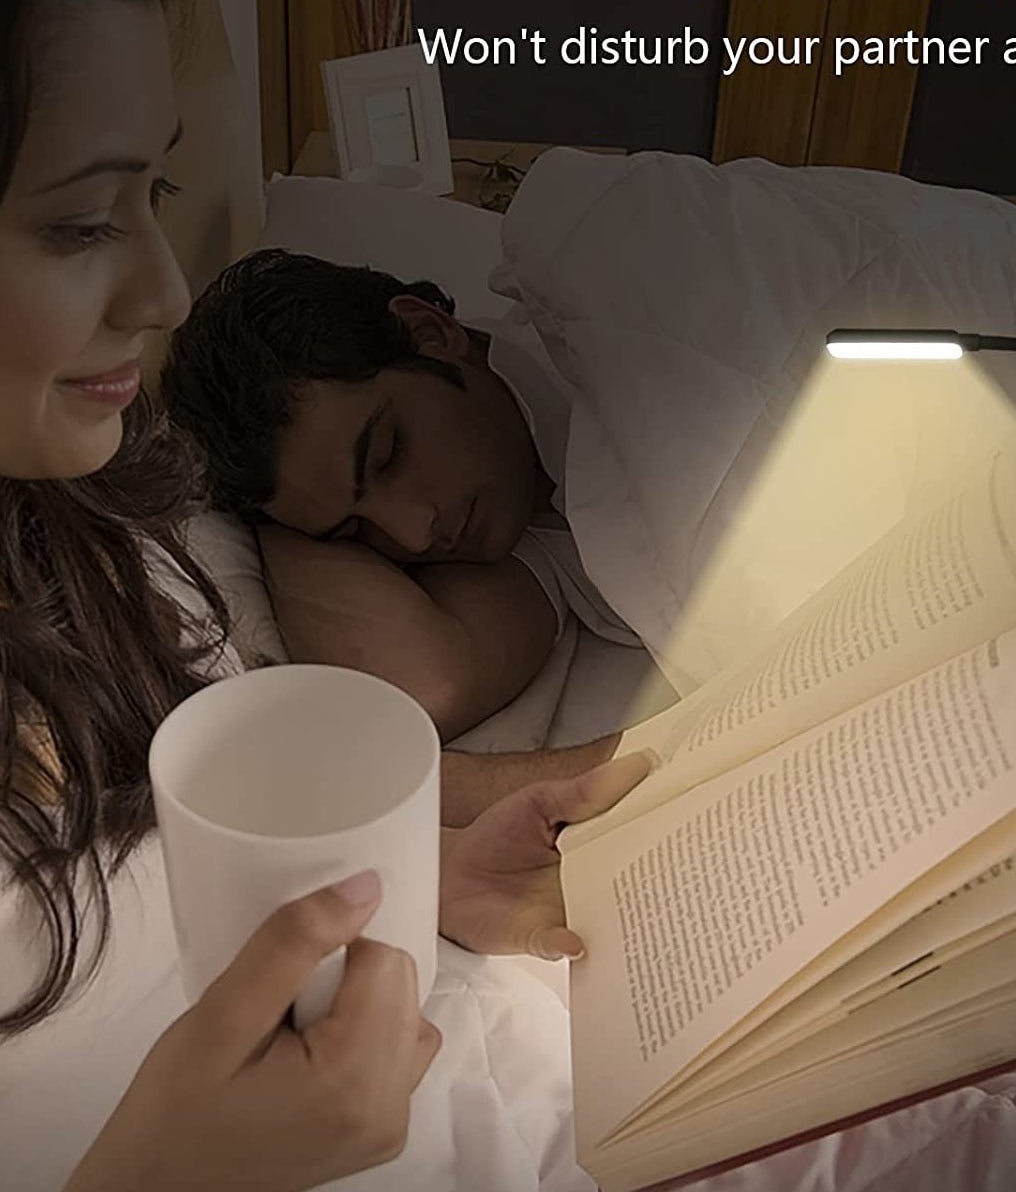 The lamp clipped to a book while a person reads in the dark next to their sleeping partner